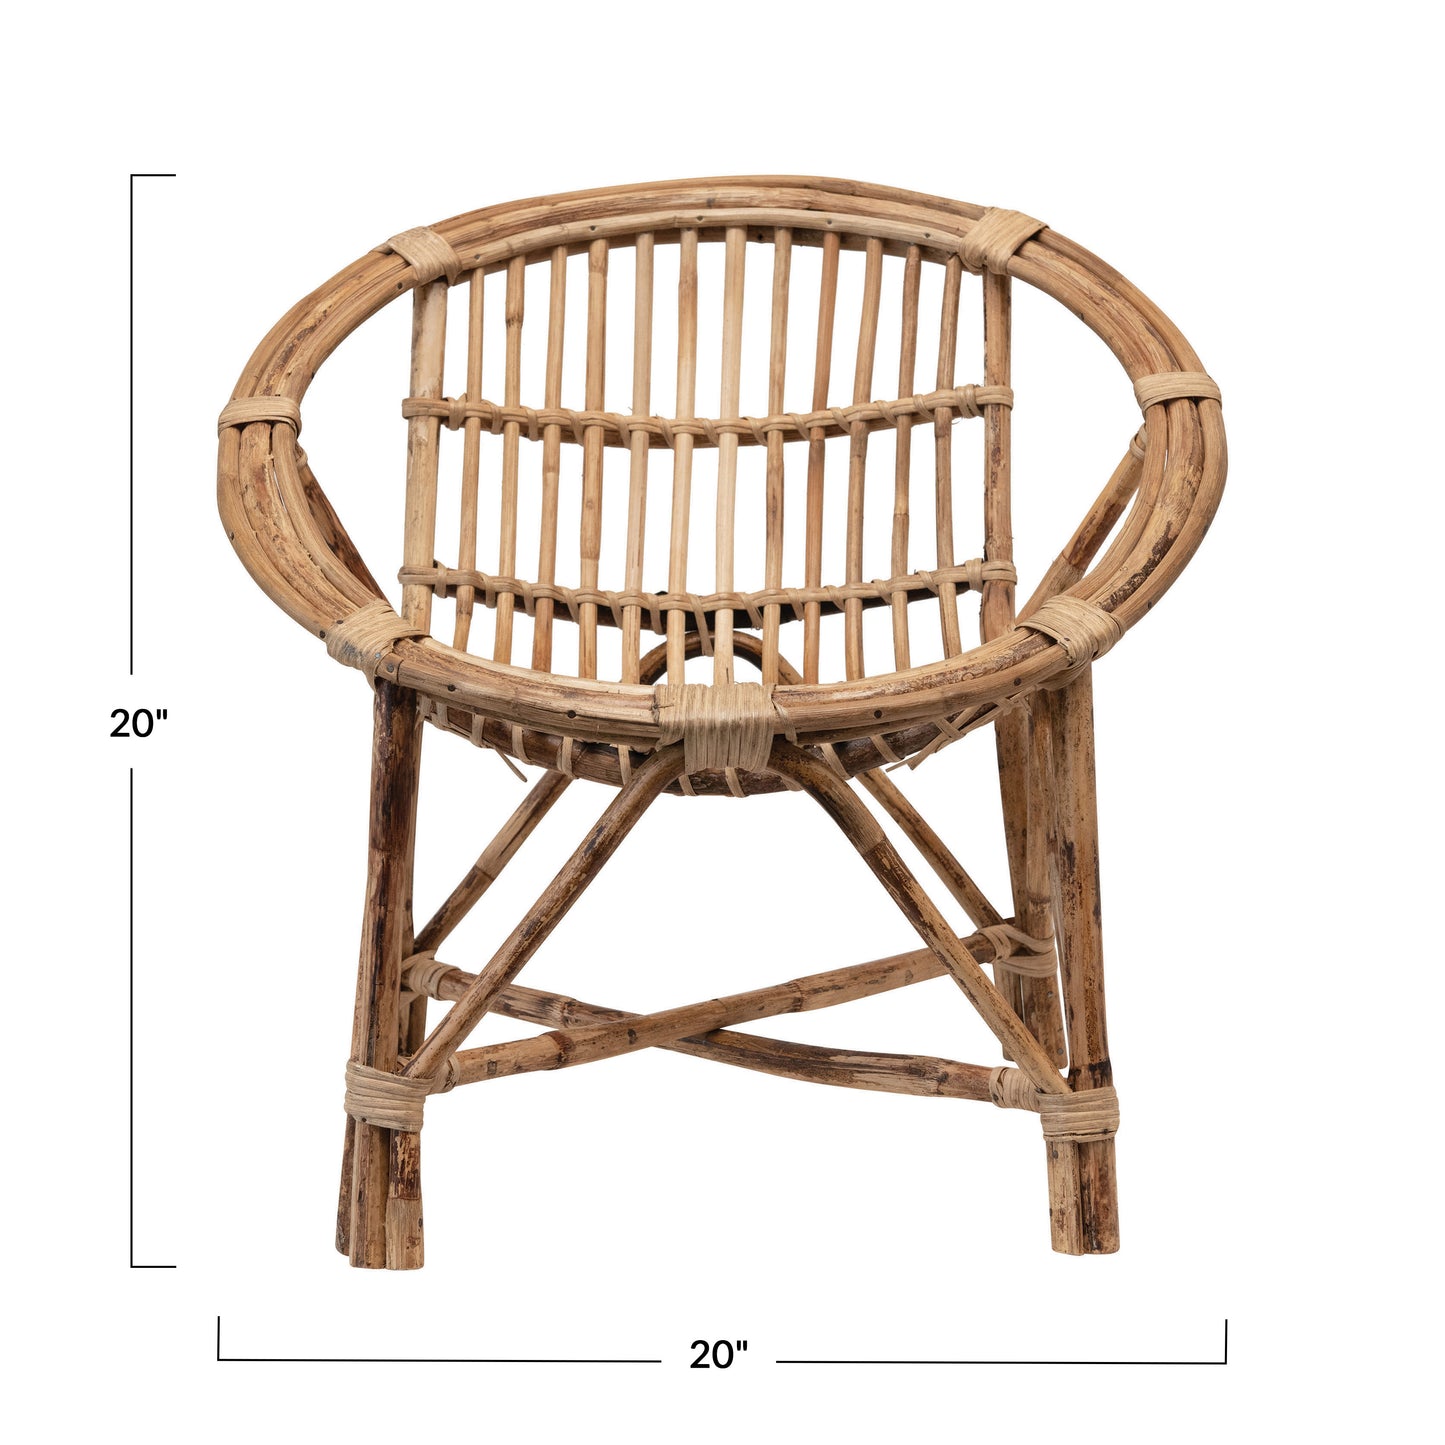 lily & onyx Handwoven Natural Rattan Chair - lily & onyx